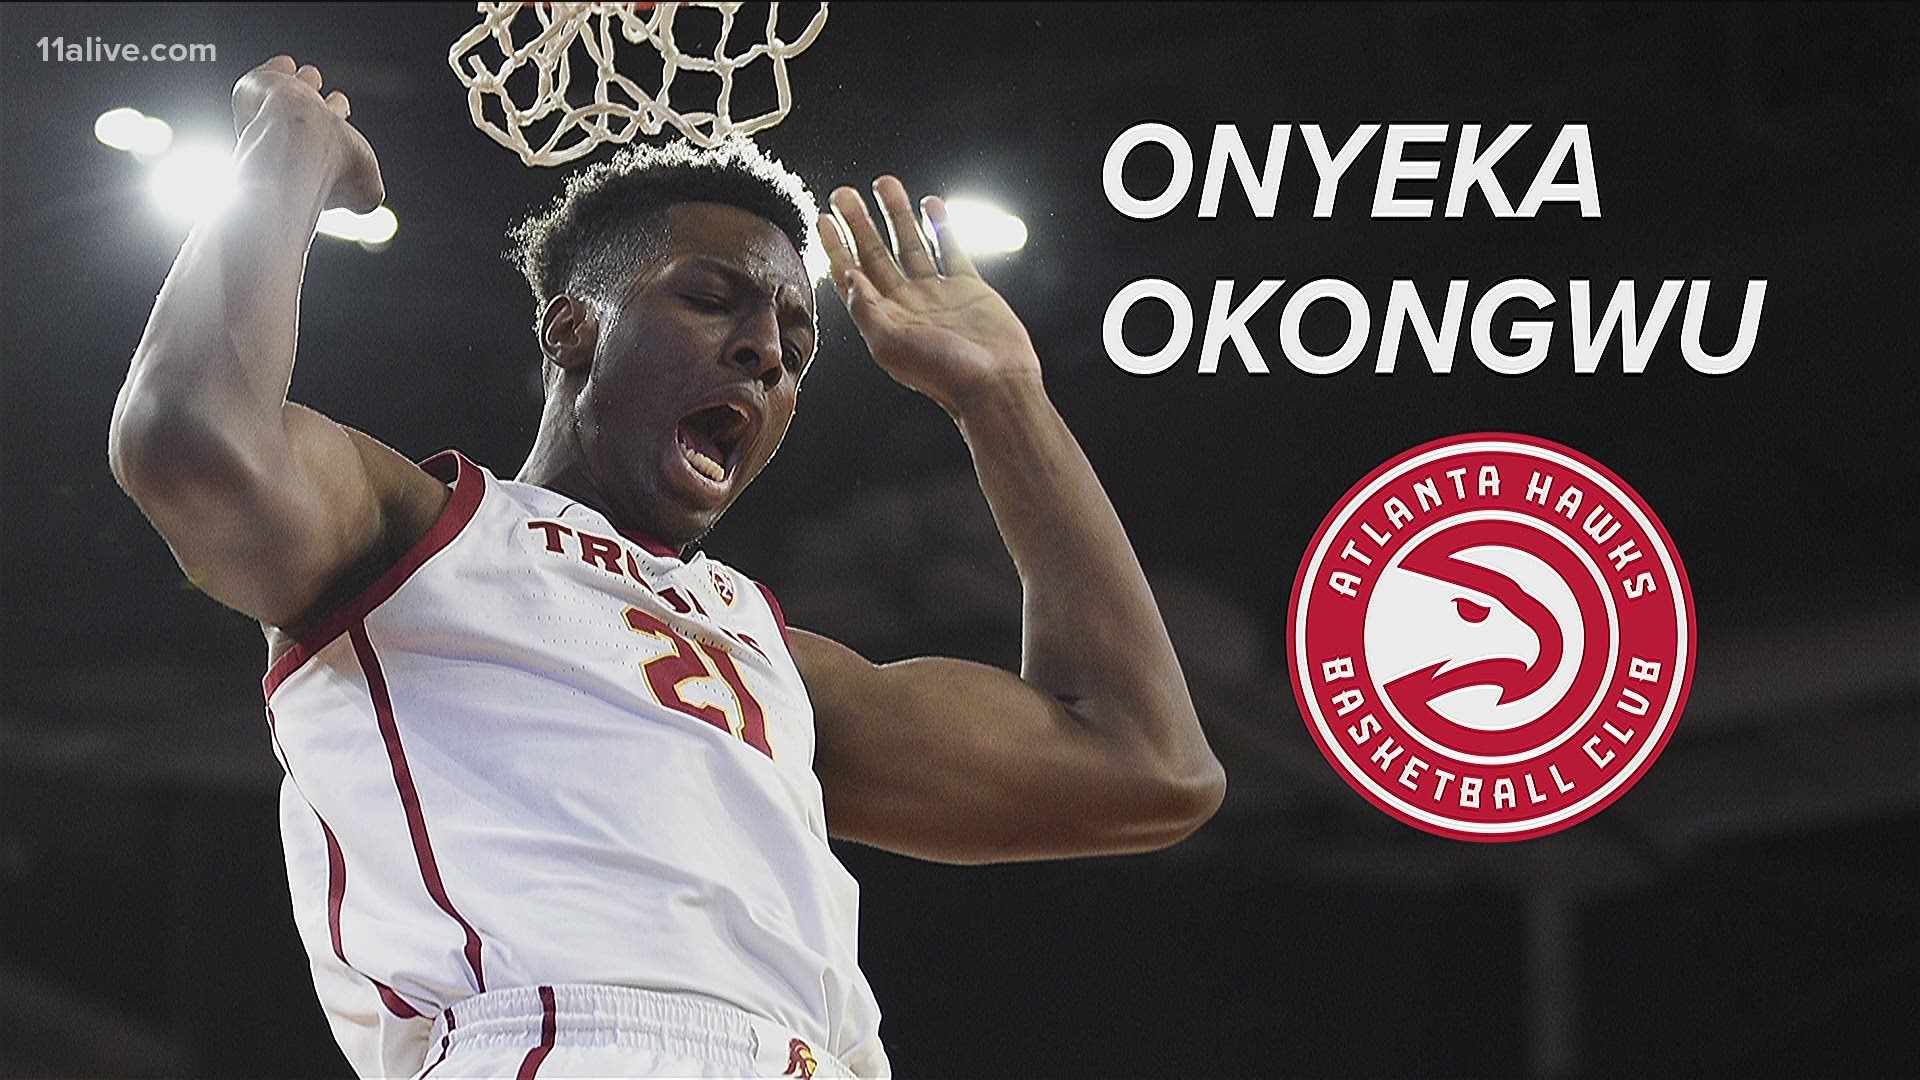 The Atlanta Hawks added to their young nucleus by selecting center Onyeka Okongwu from Southern California with the No. 6 pick n the NBA draft.